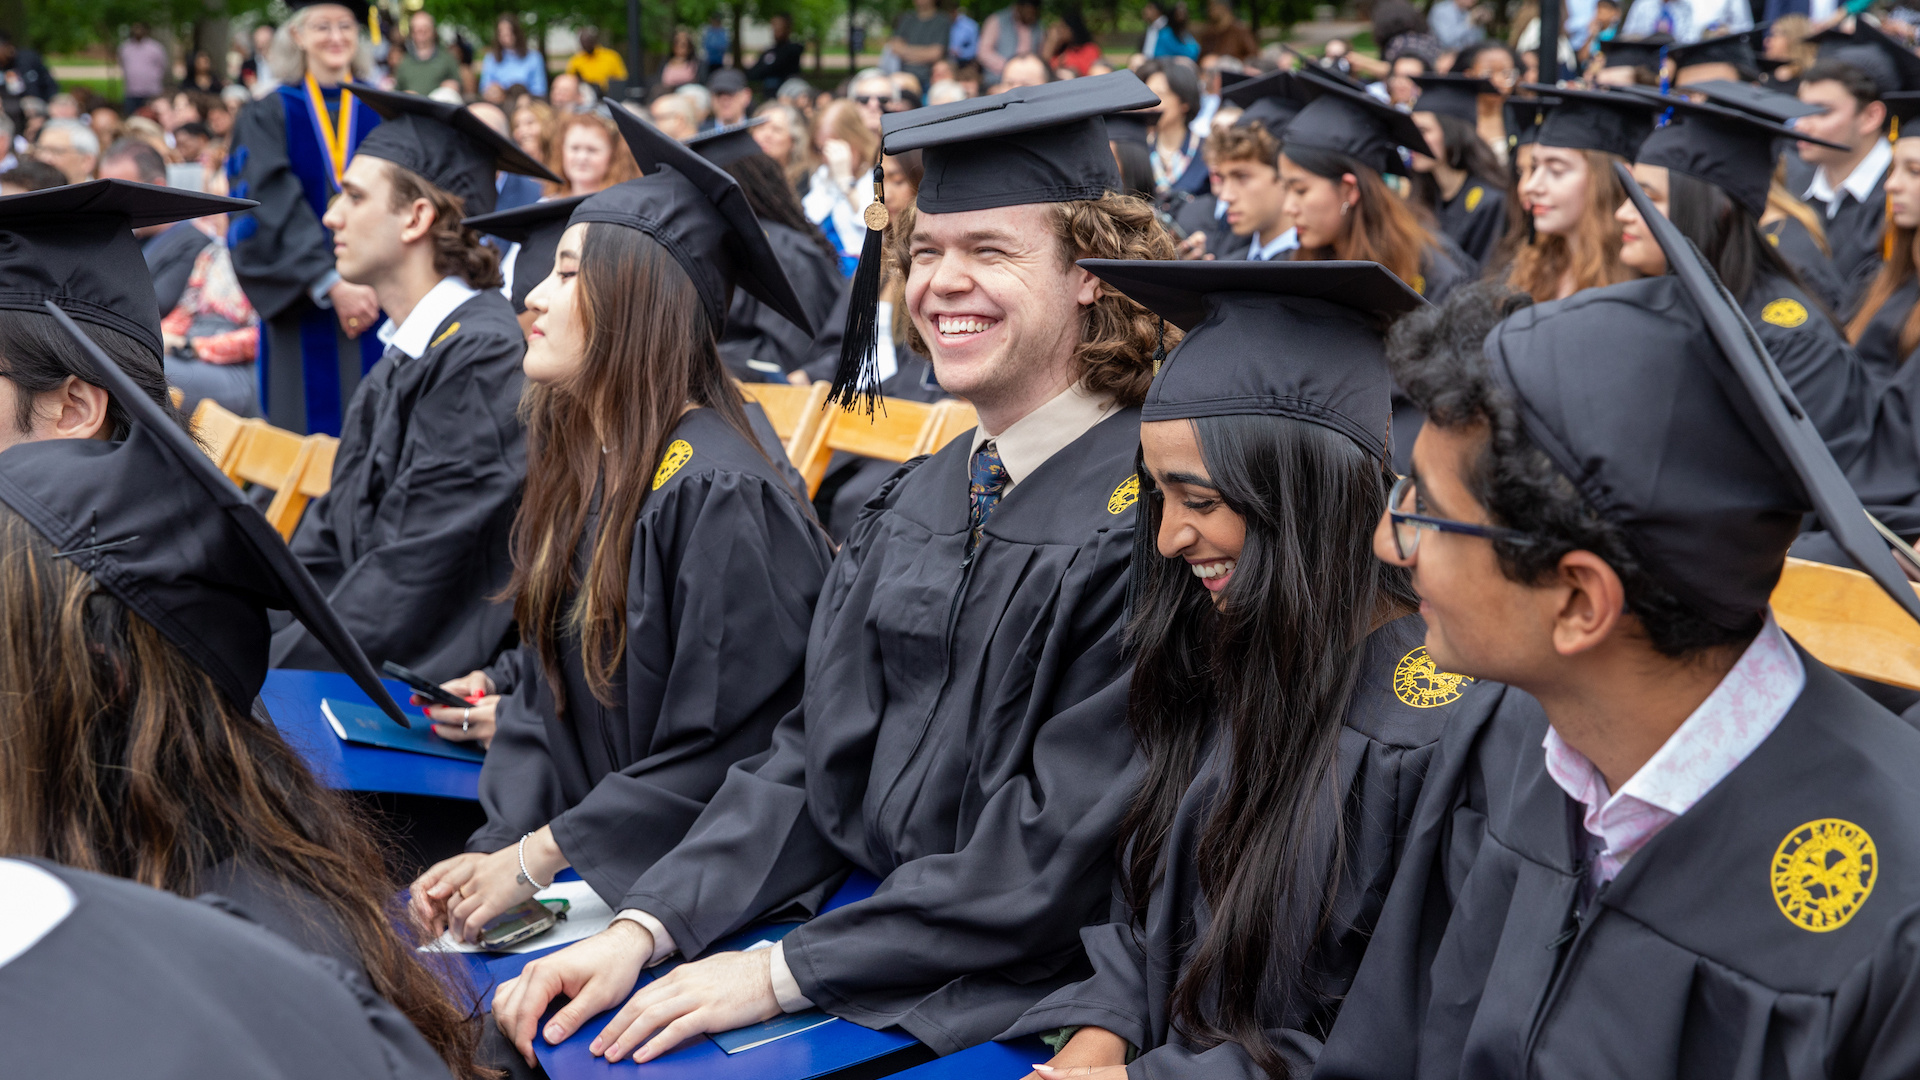 Students at Oxford 2023 Commencement